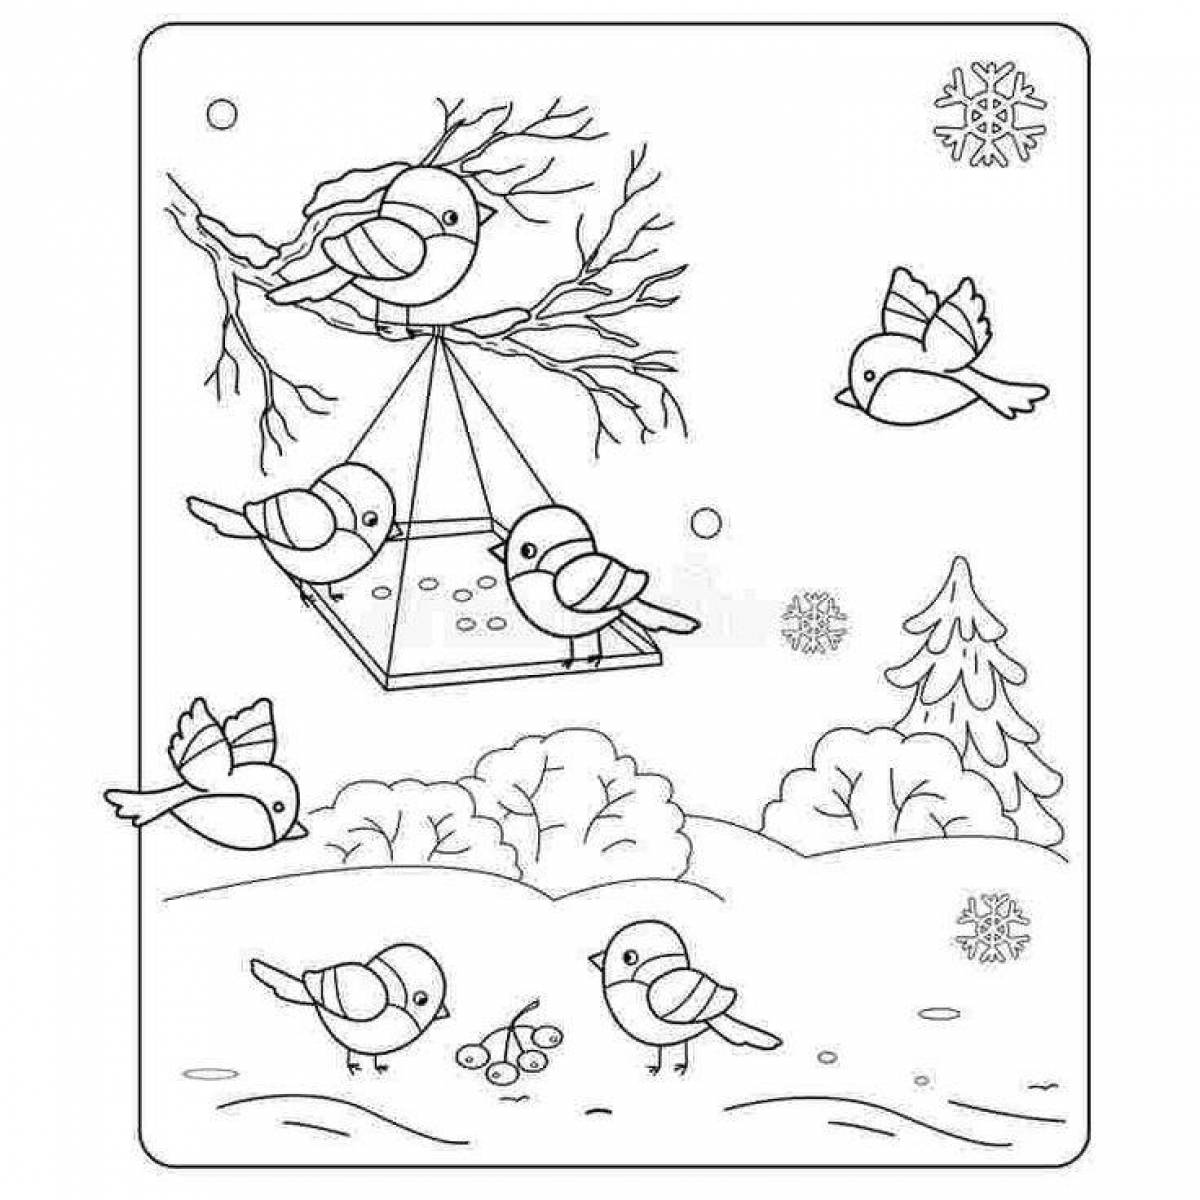 Colorful bird feeder coloring page for kids